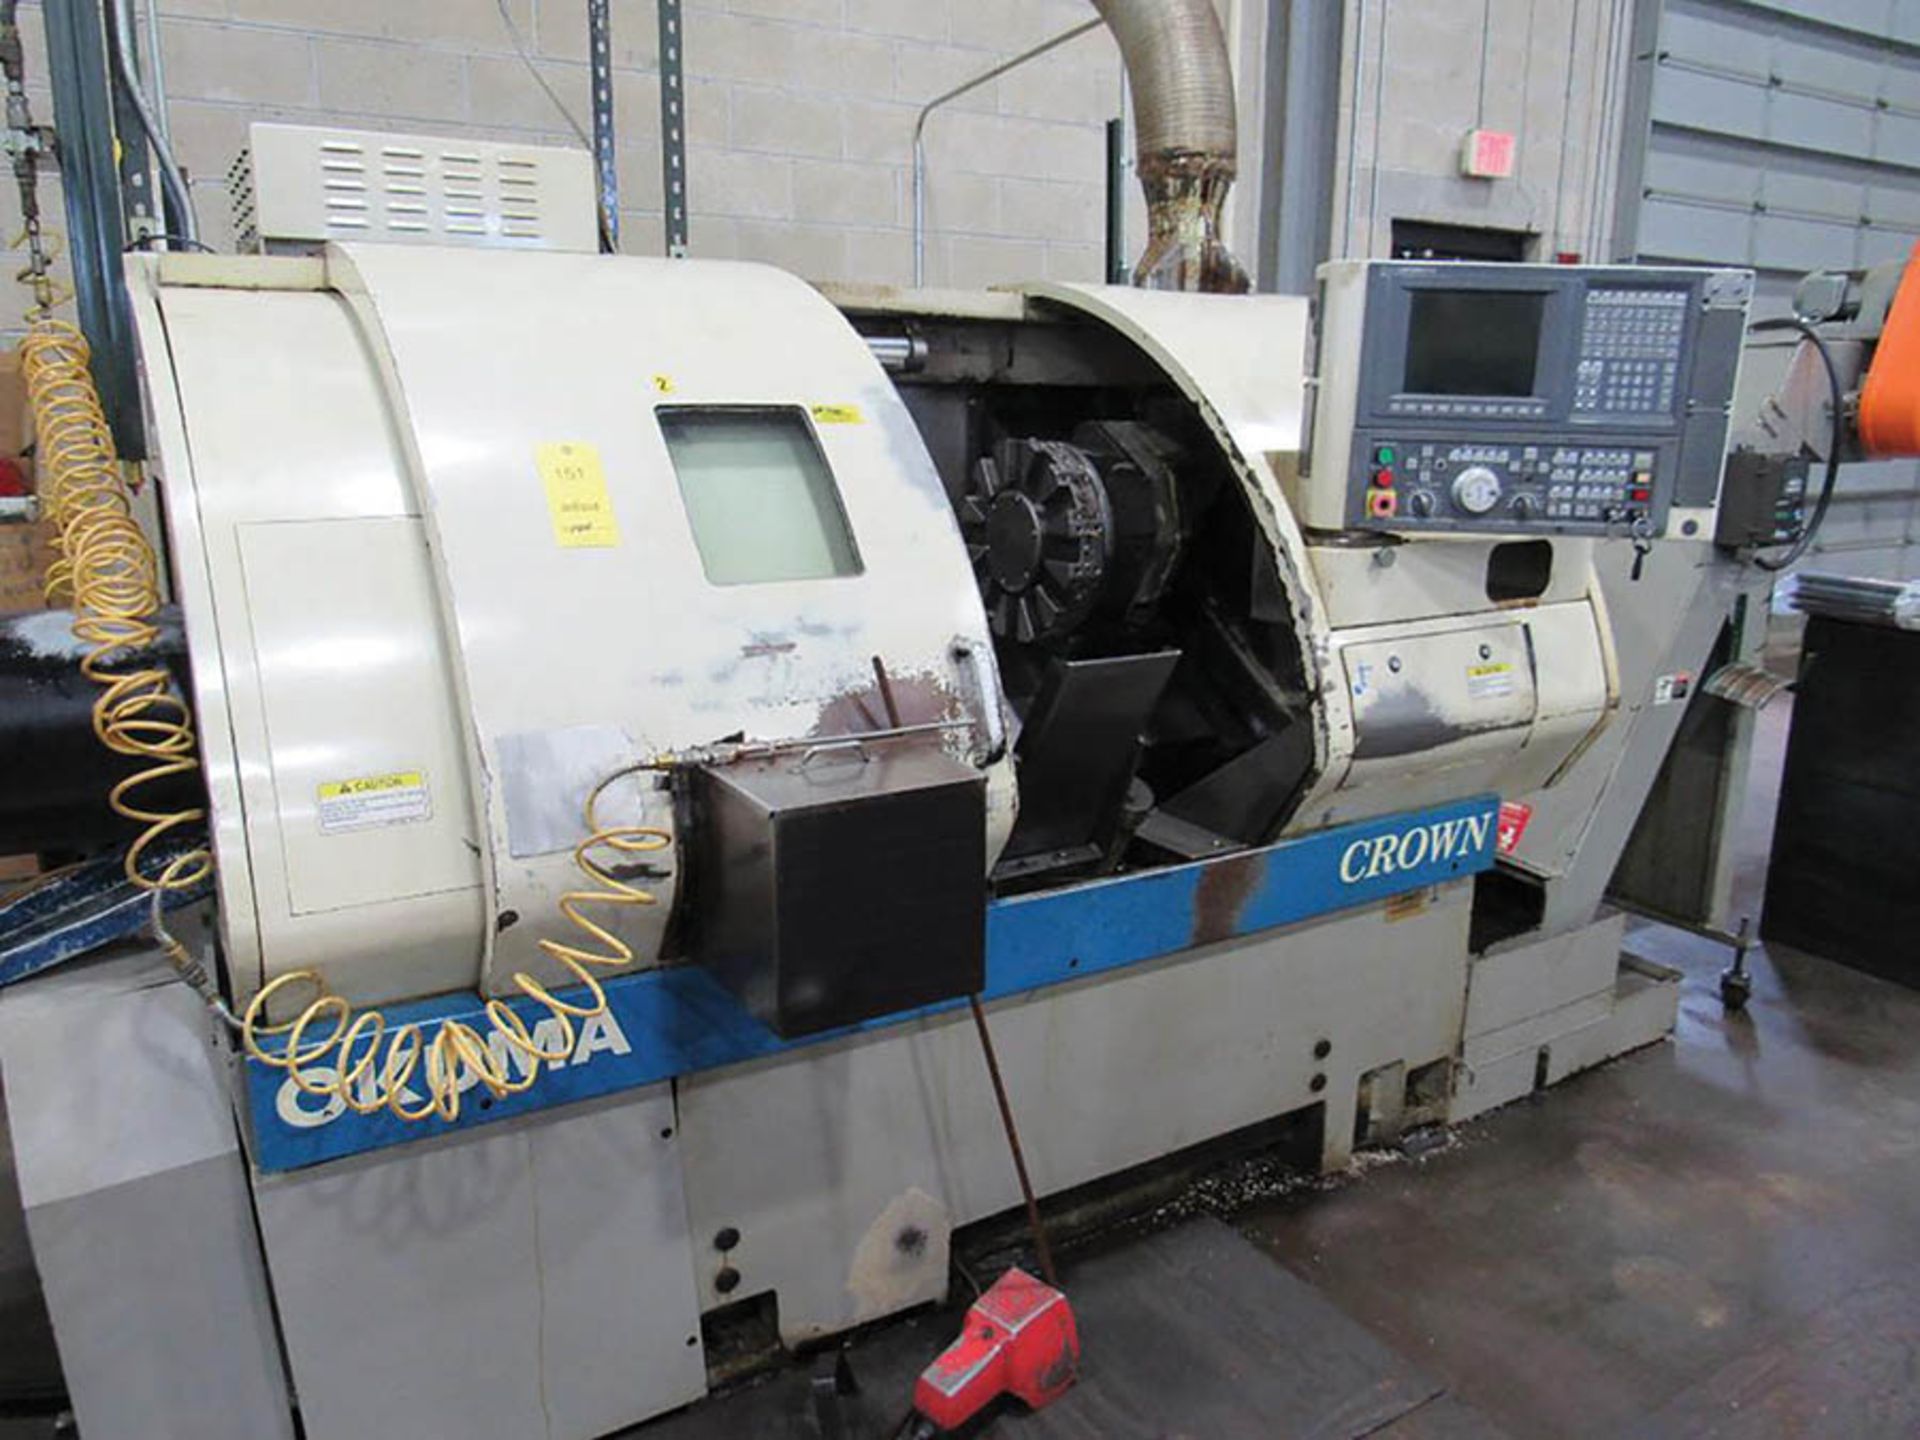 OKUMA CROWN CNC TURNING CENTER MODEL 762S-BB, S/N 0284, 12-POSITION TURRET, 3.15'' SPINDLE BORE,